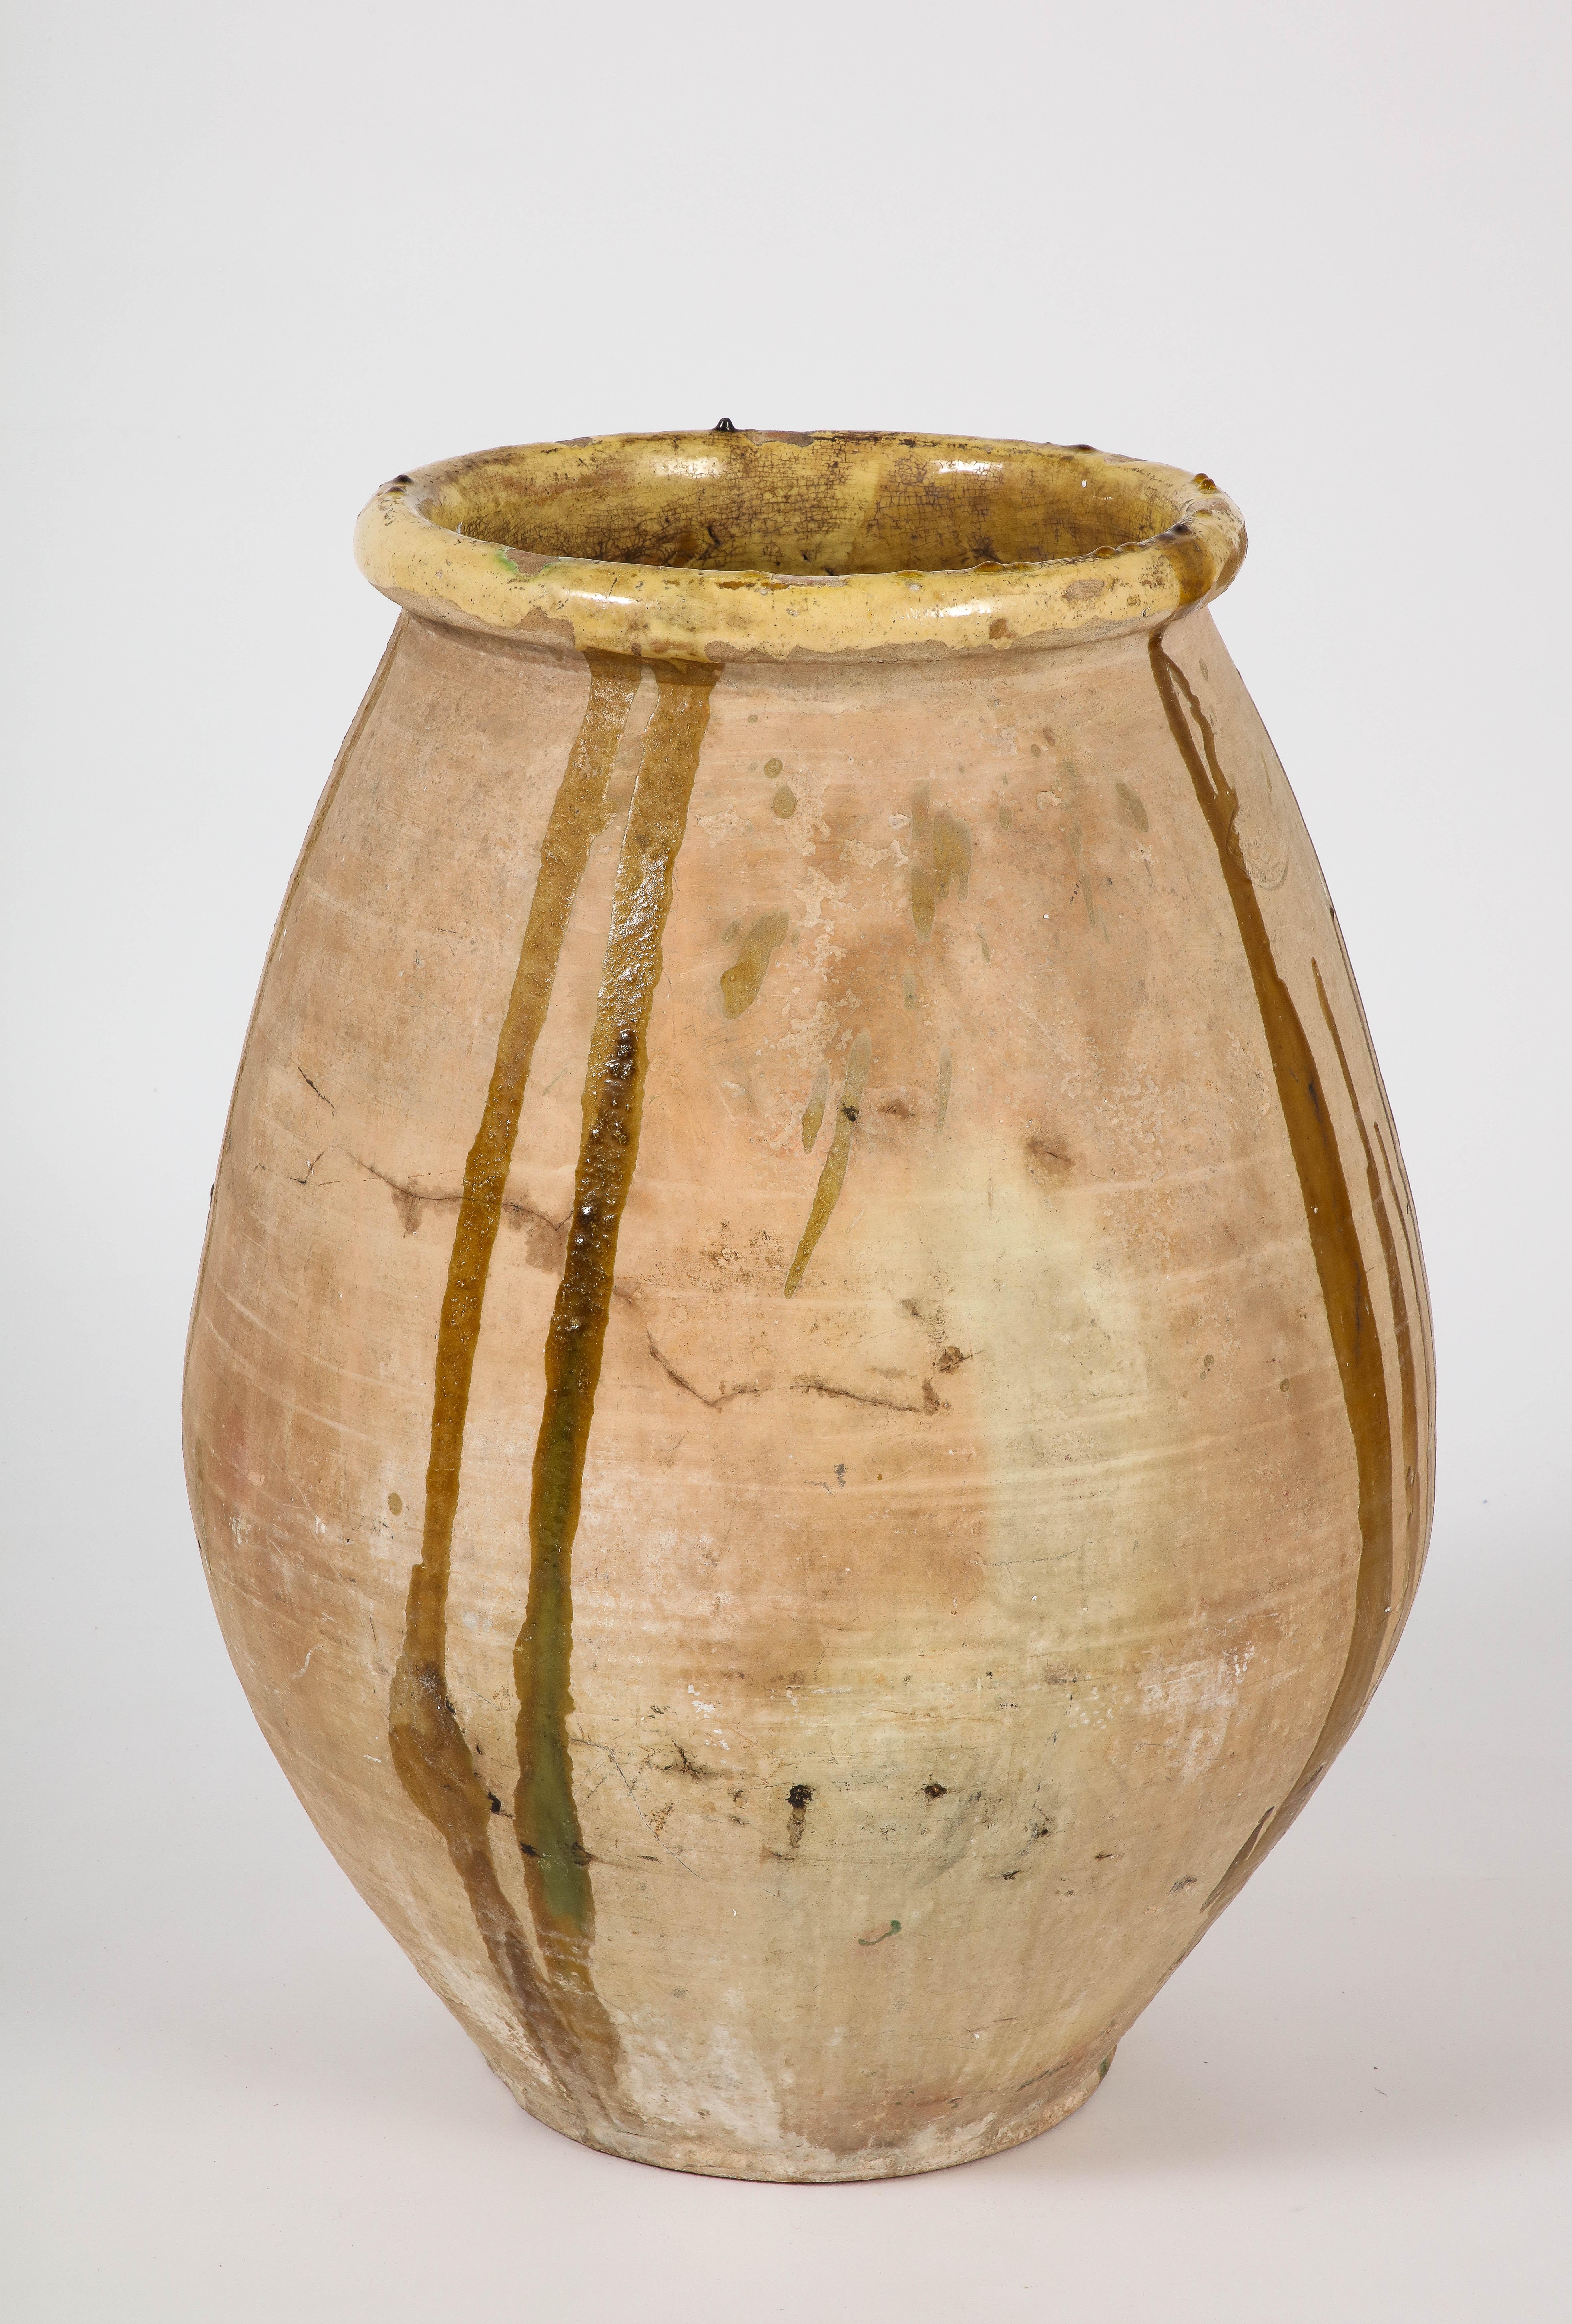 French Provincial 18th Century Terracotta Olive Oil Biot Jar with Glaze For Sale 3